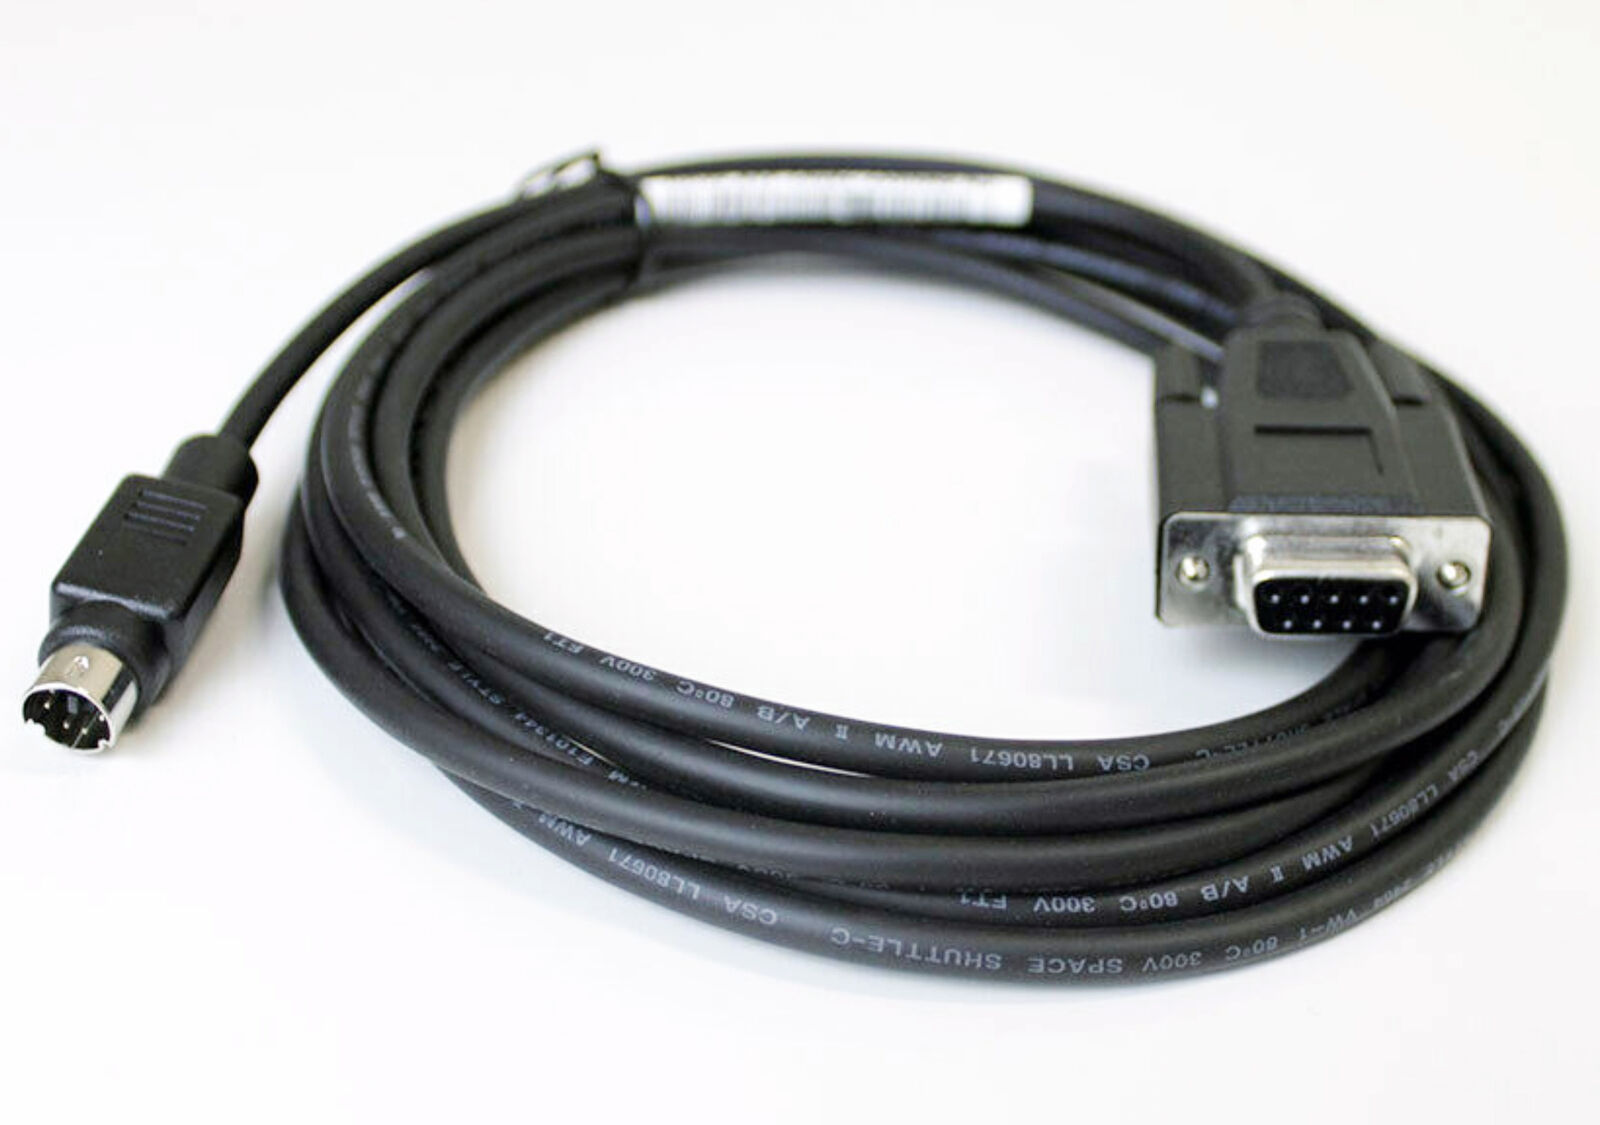 New Dell Password Reset/Service Cable MN657 MD1200 MD1220 MD3200 MD3200i MD3600i